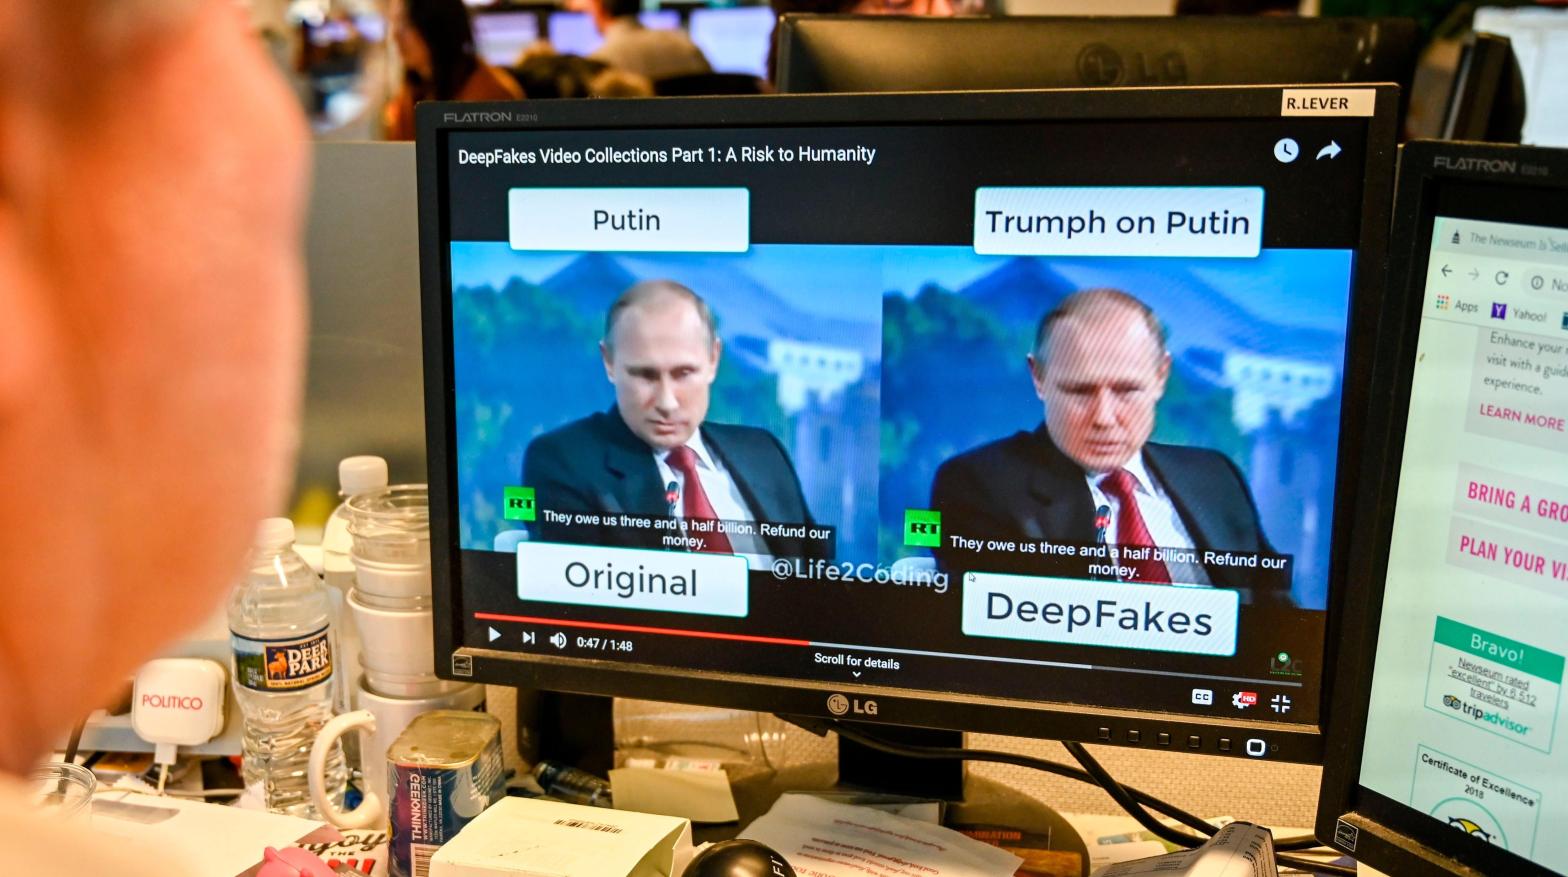 A video of Vladimir Putin that has been deepfaked with Donald Trump's likeness.